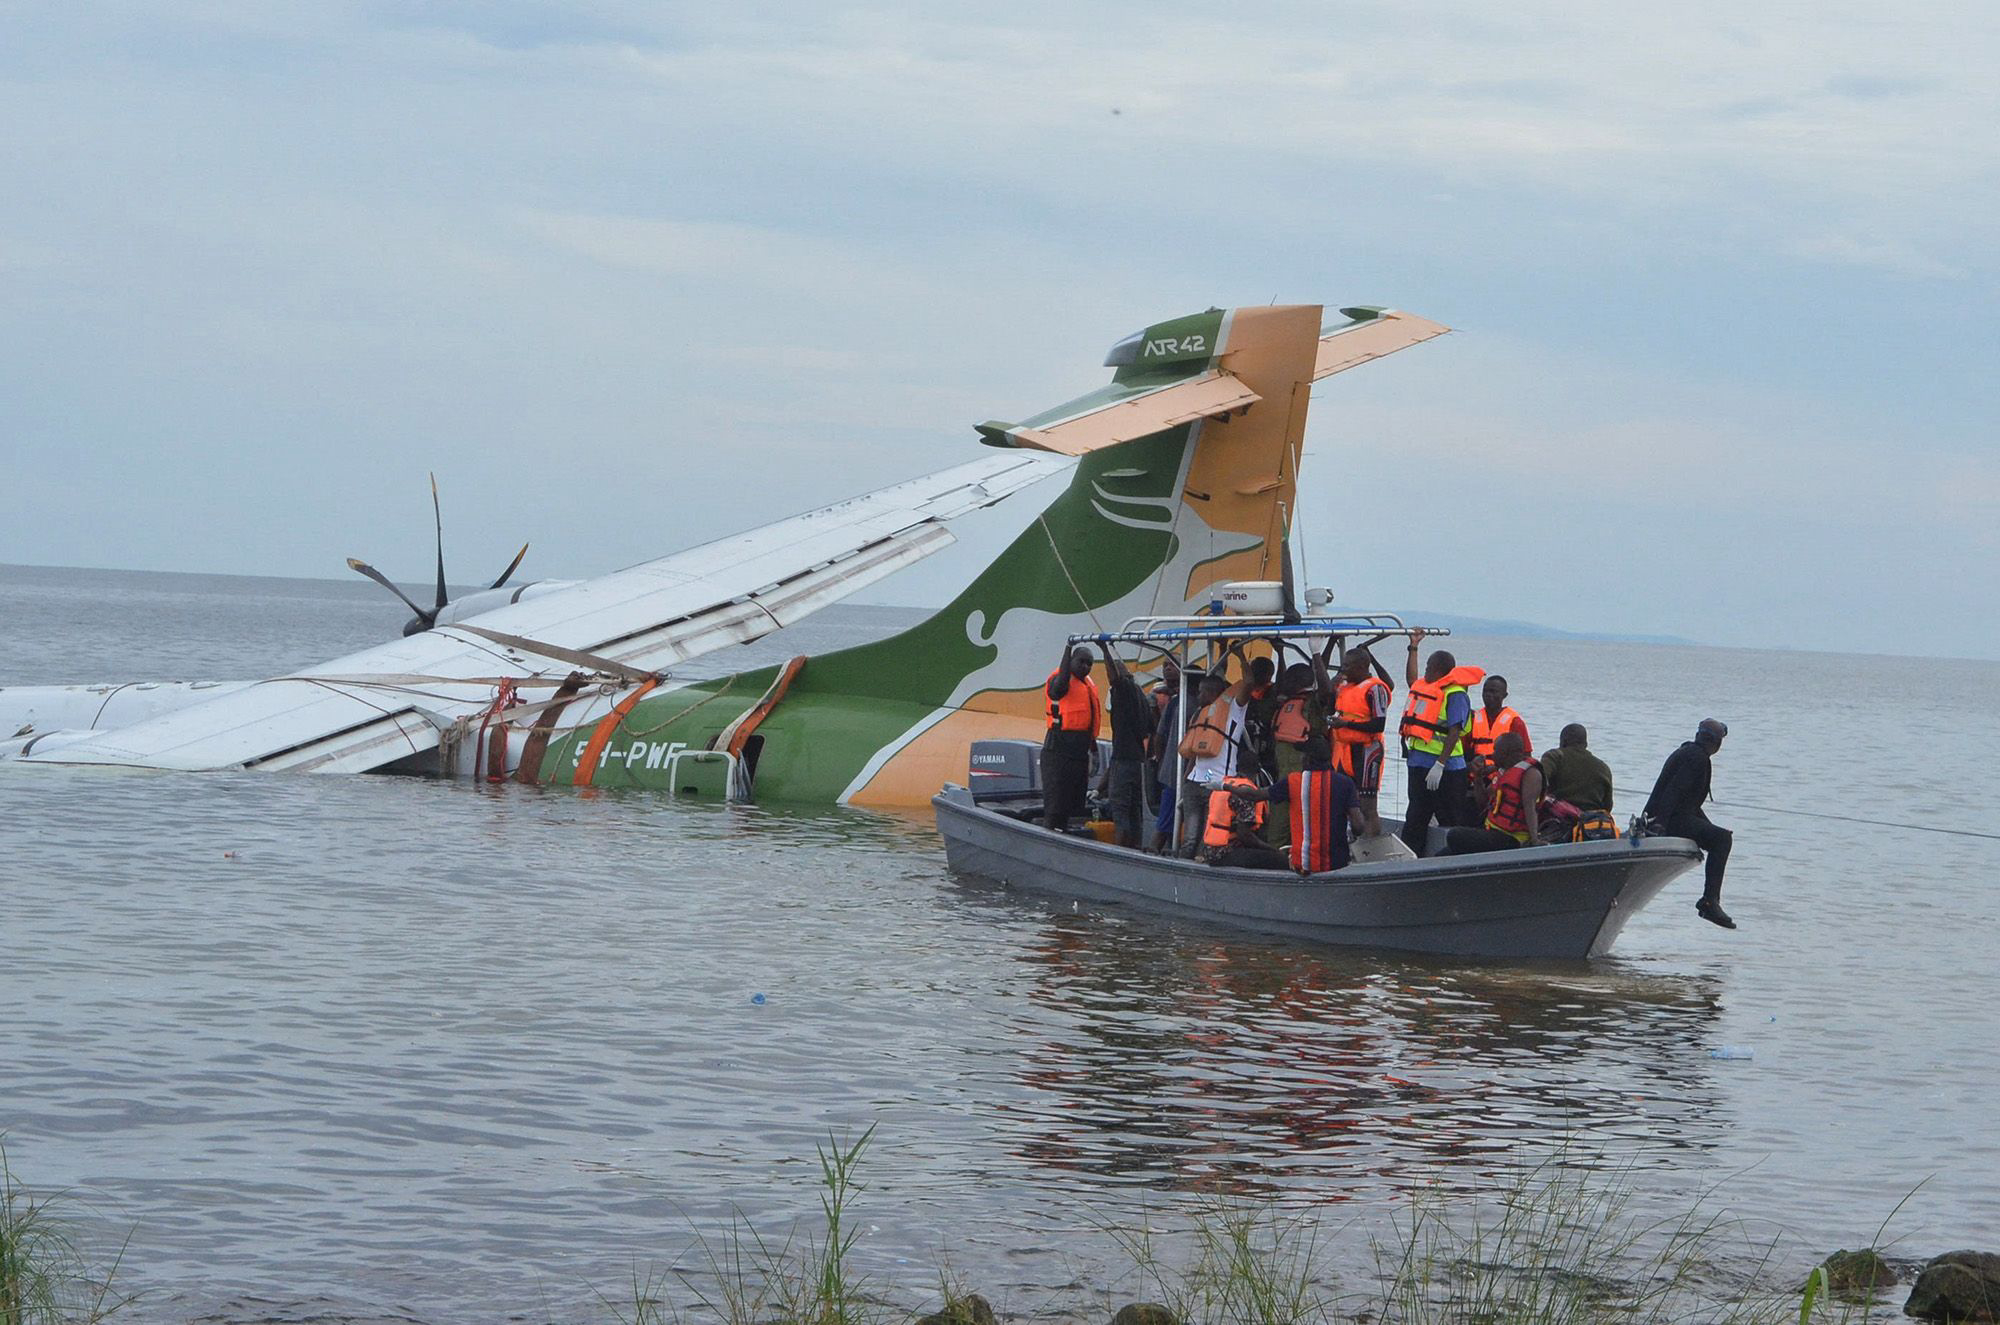 Tanzania Deadly Plane Crash: Rescue Efforts Were Too Slow and ill-Equipped